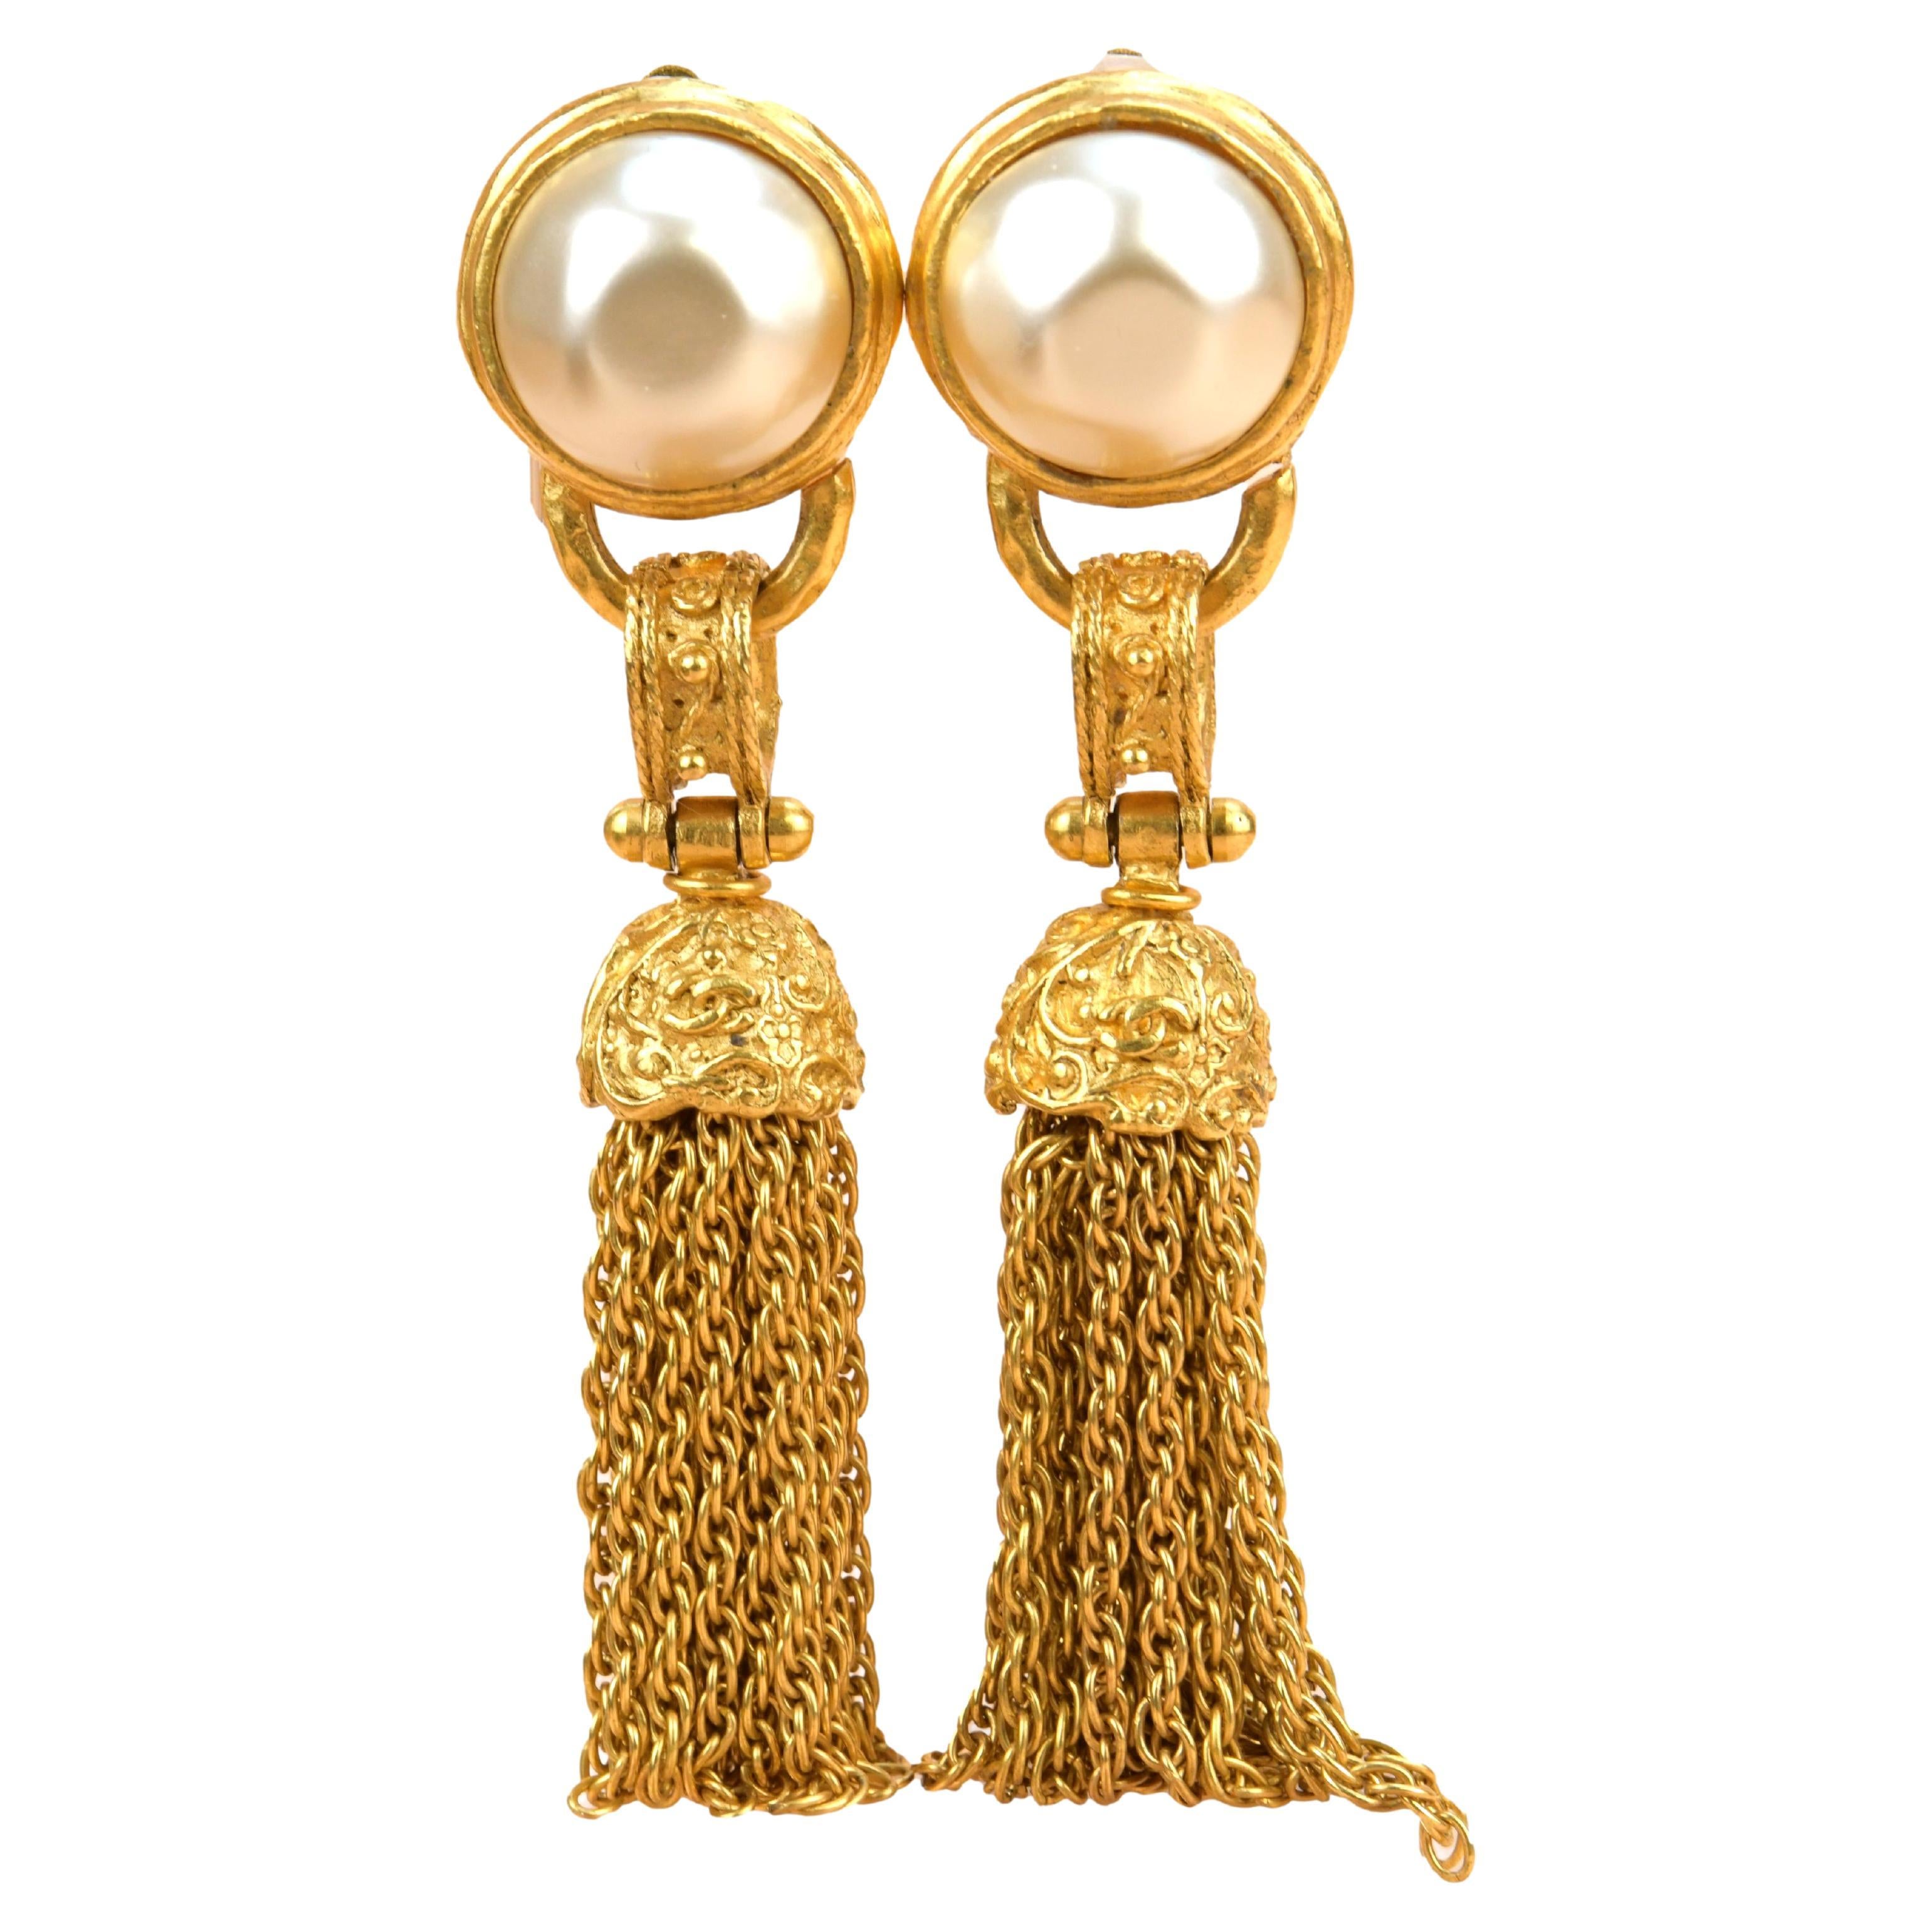 Chanel Chanel Earrings 94a Coco Mark Gold Women's Accessories Auction